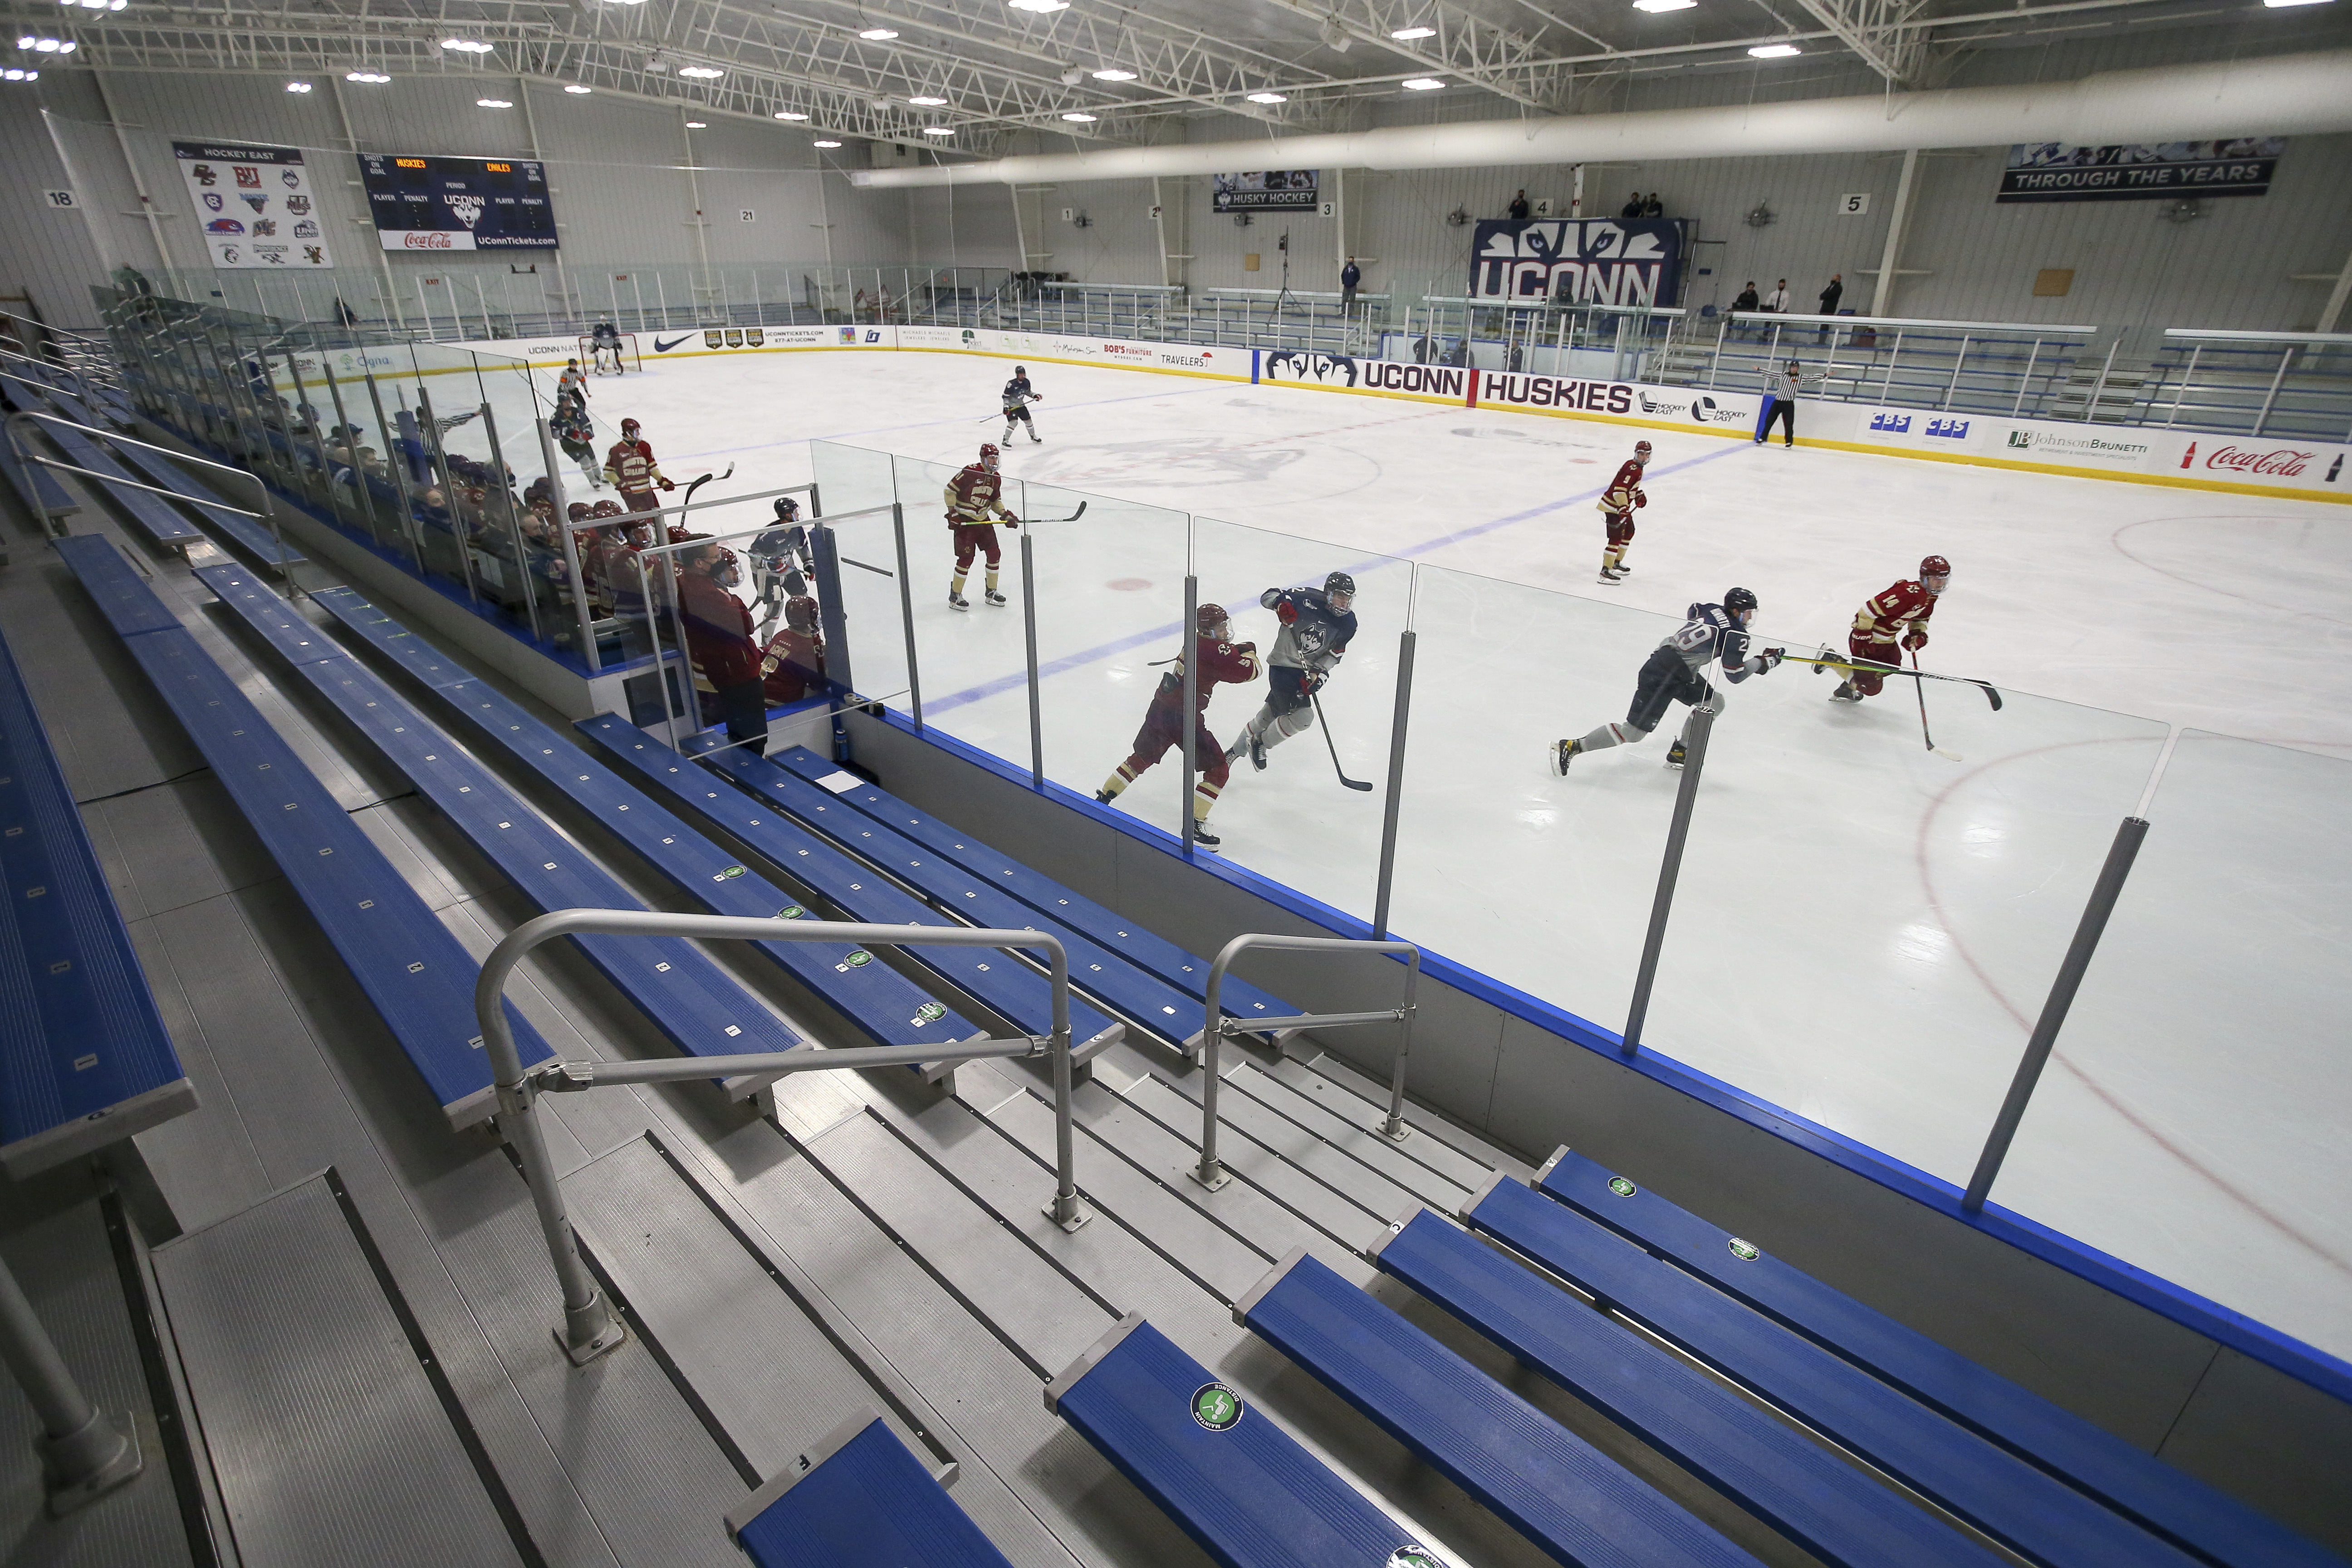 South of Boston, Cup spilleth over to youth hockey - The Boston Globe